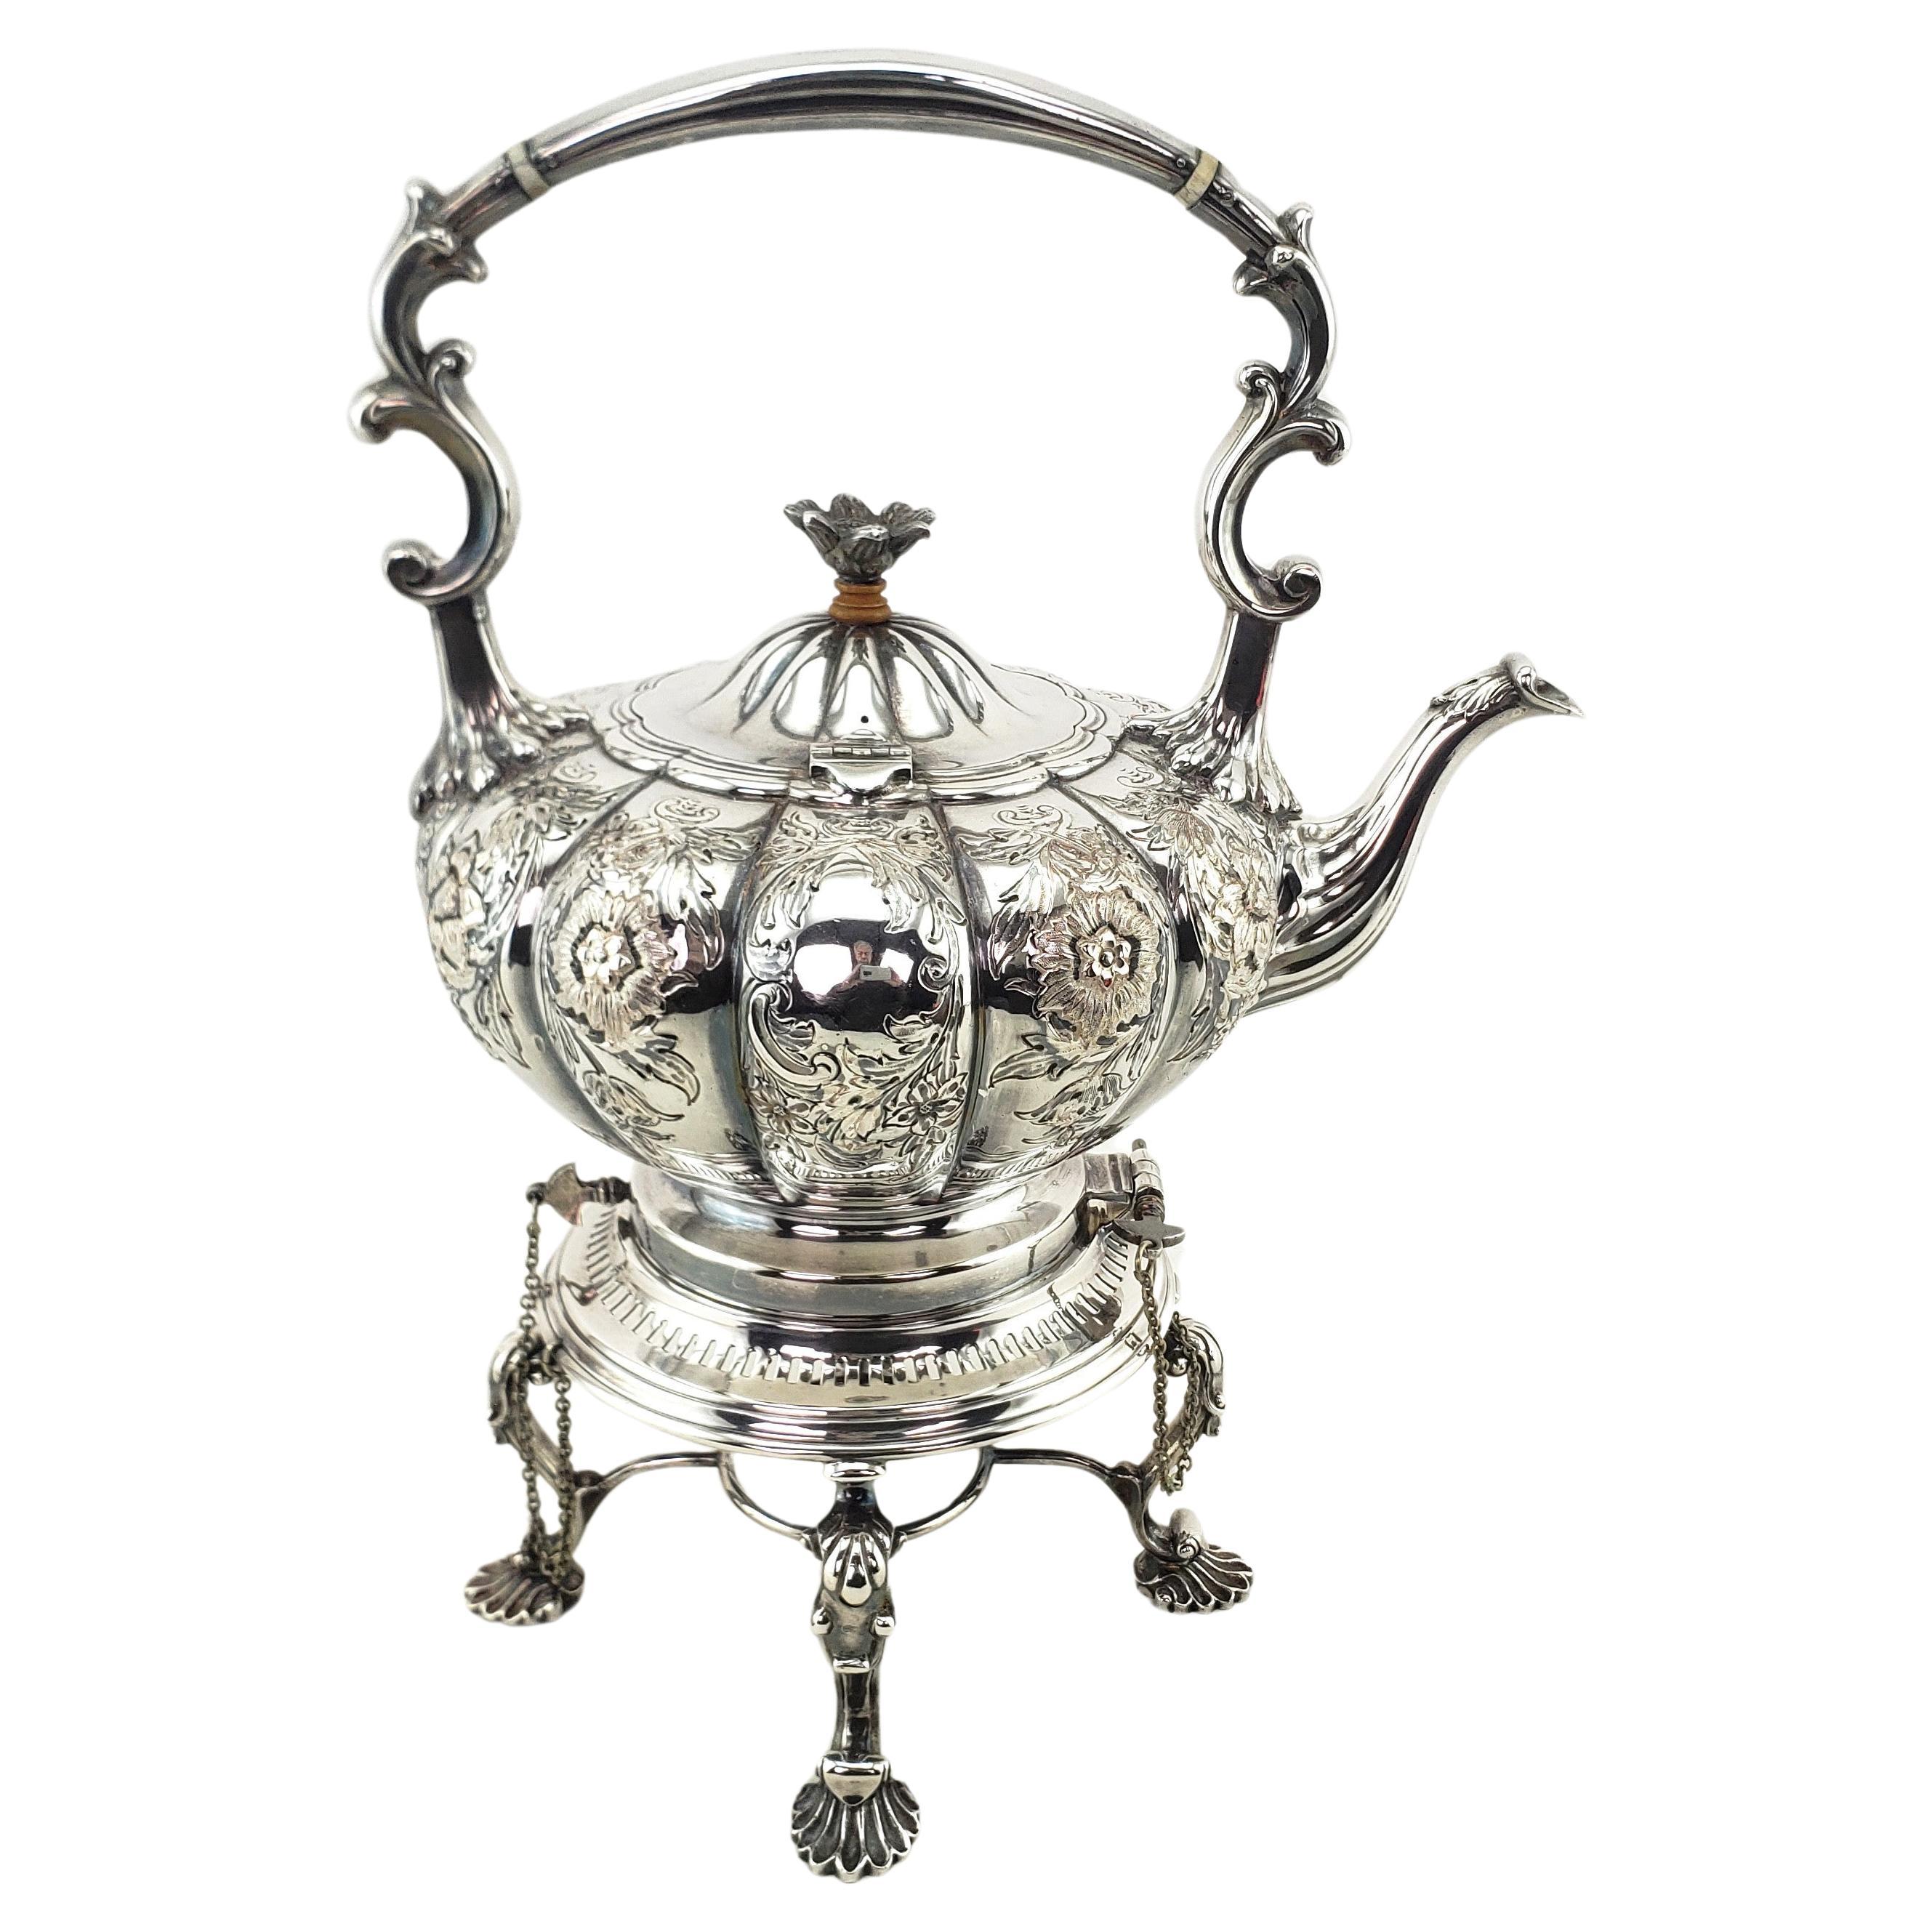 Antique English Silver Plated Tipping Hot Water Kettle with Chased Floral Motif For Sale